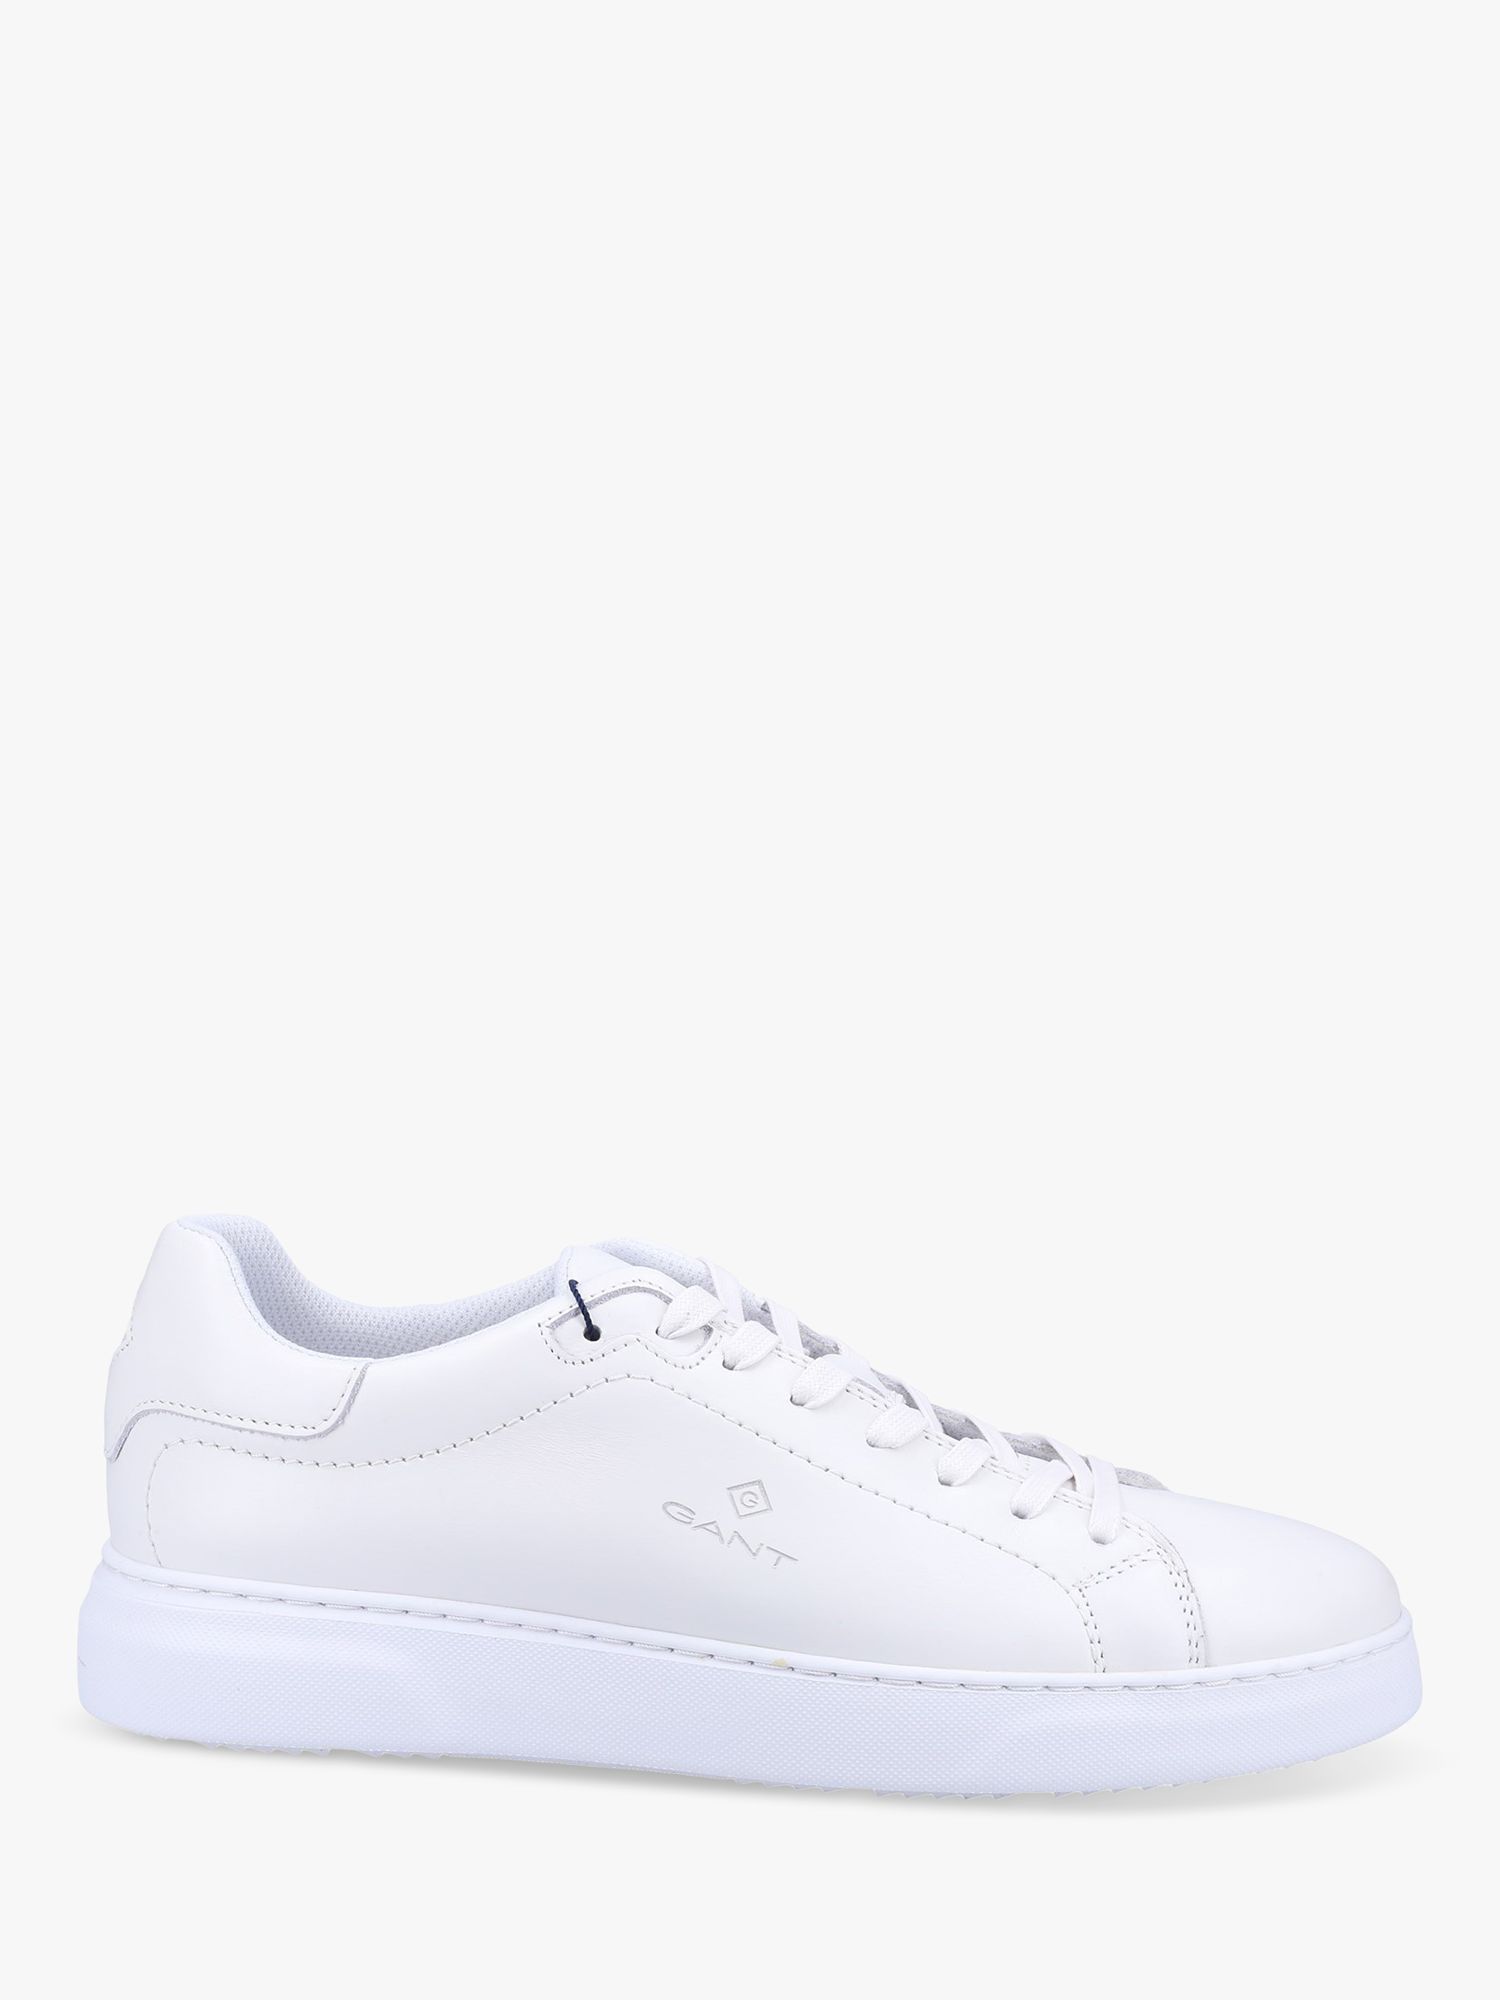 GANT Joree Leather Lace Up Trainers